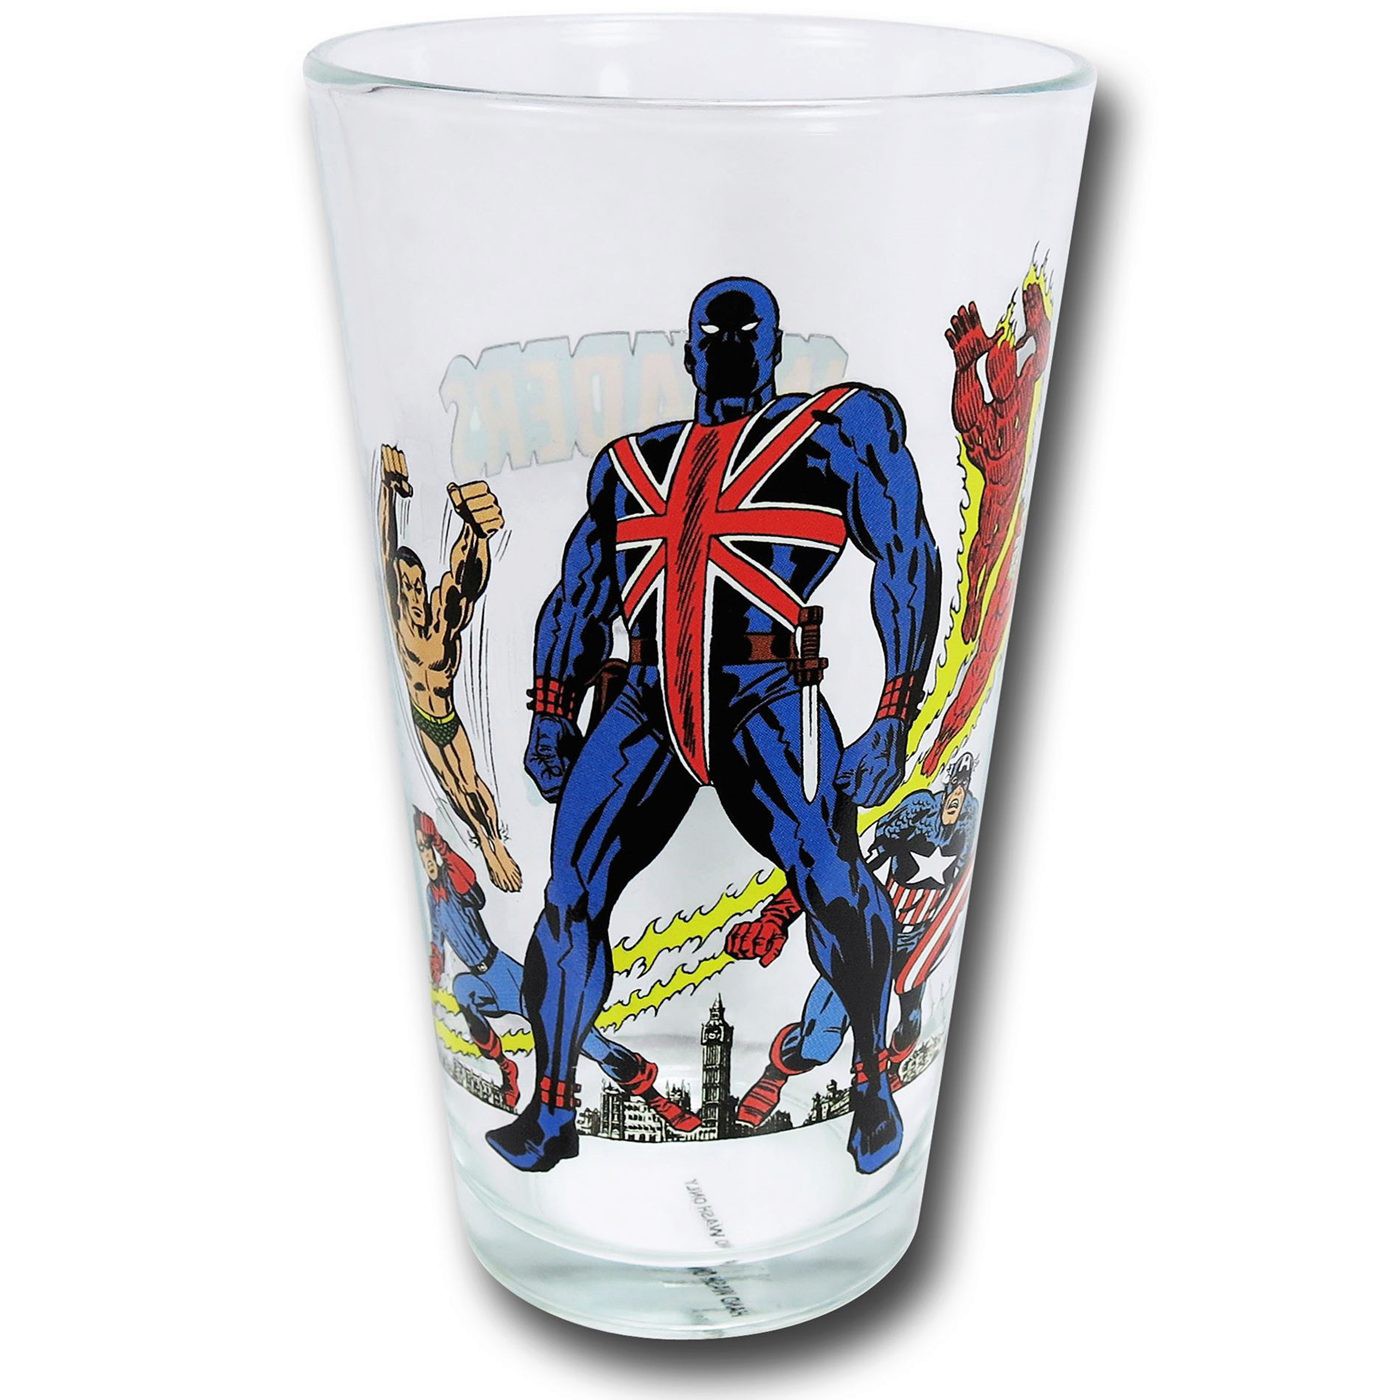 The Invaders Pint Glass